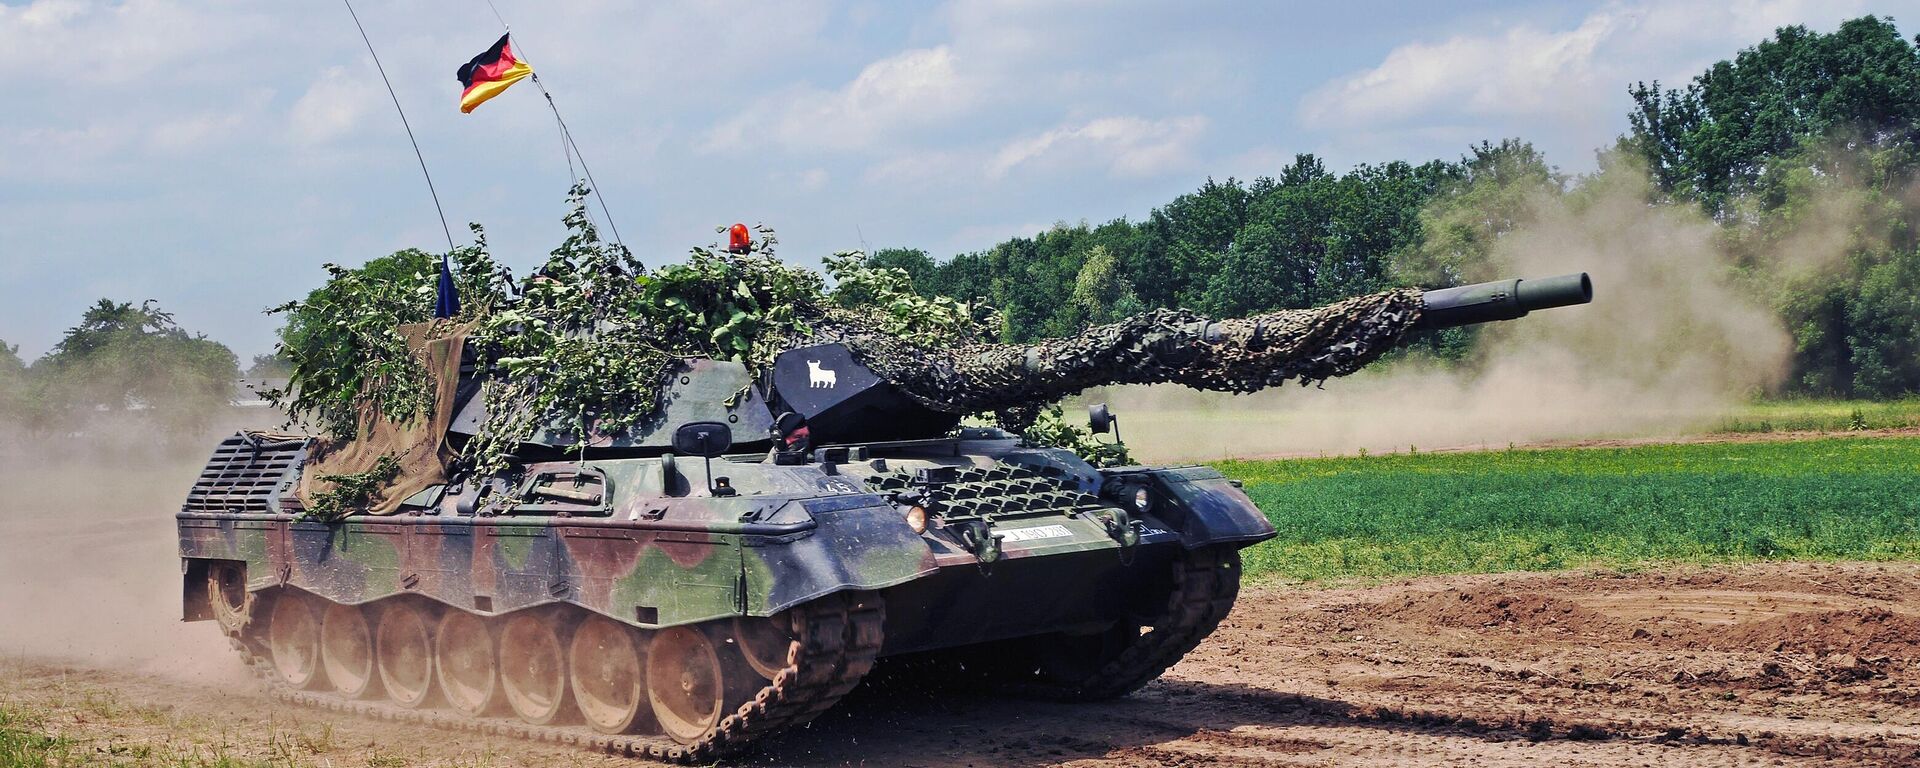 A German Leopard 1A5 tank drives past at the at the 2015 military day in Uffenheim, Germany - Sputnik International, 1920, 11.03.2023